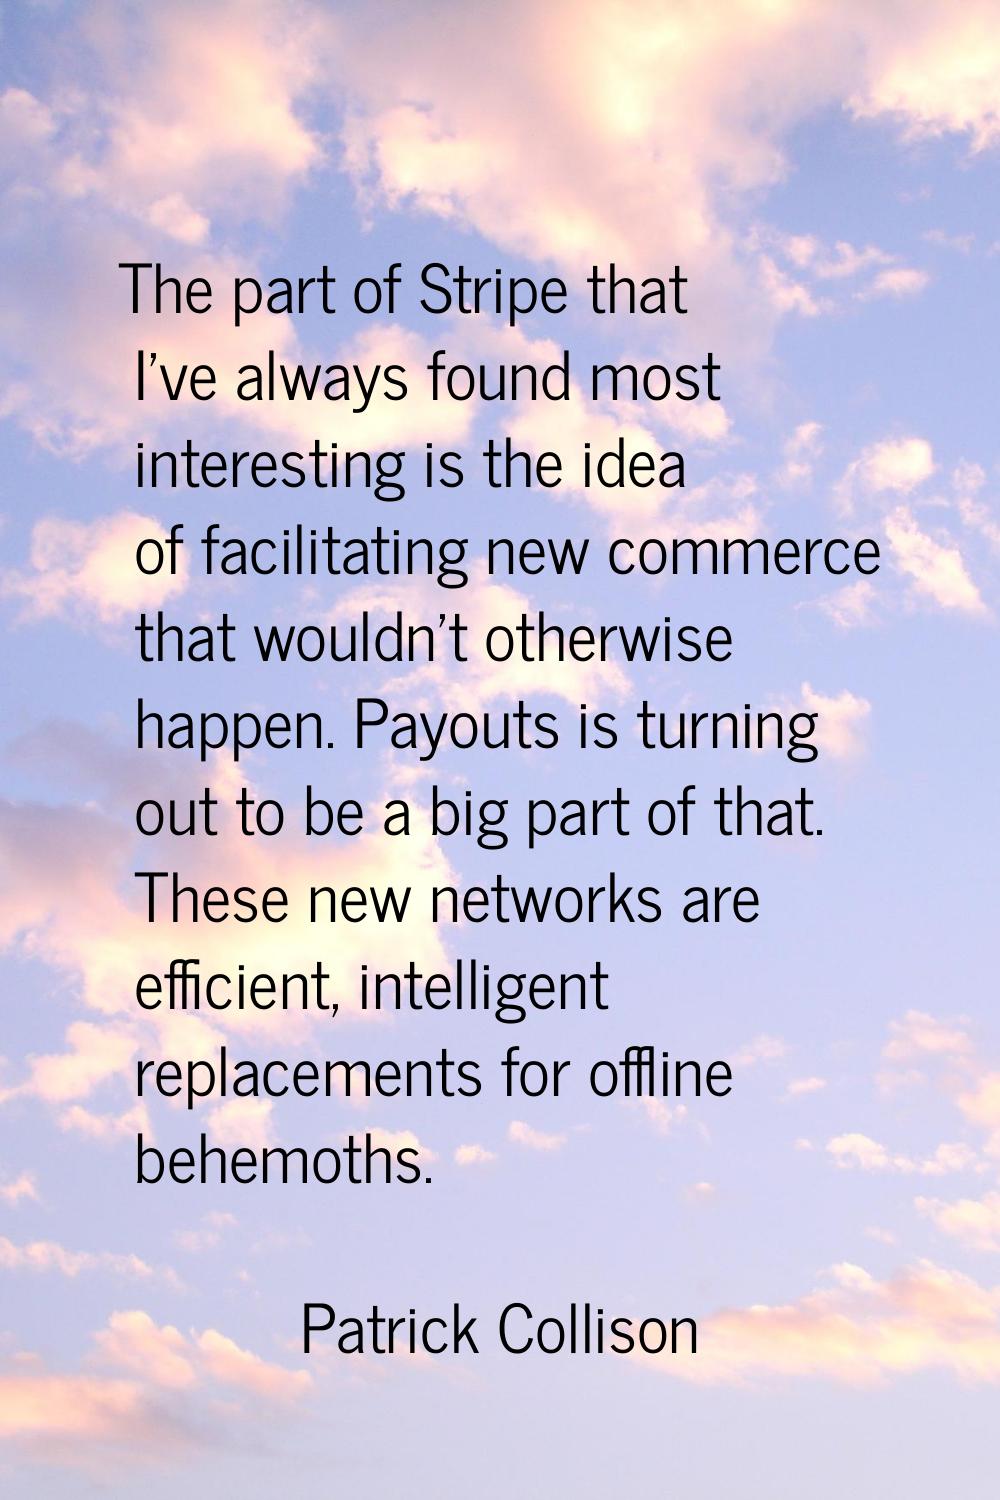 The part of Stripe that I've always found most interesting is the idea of facilitating new commerce